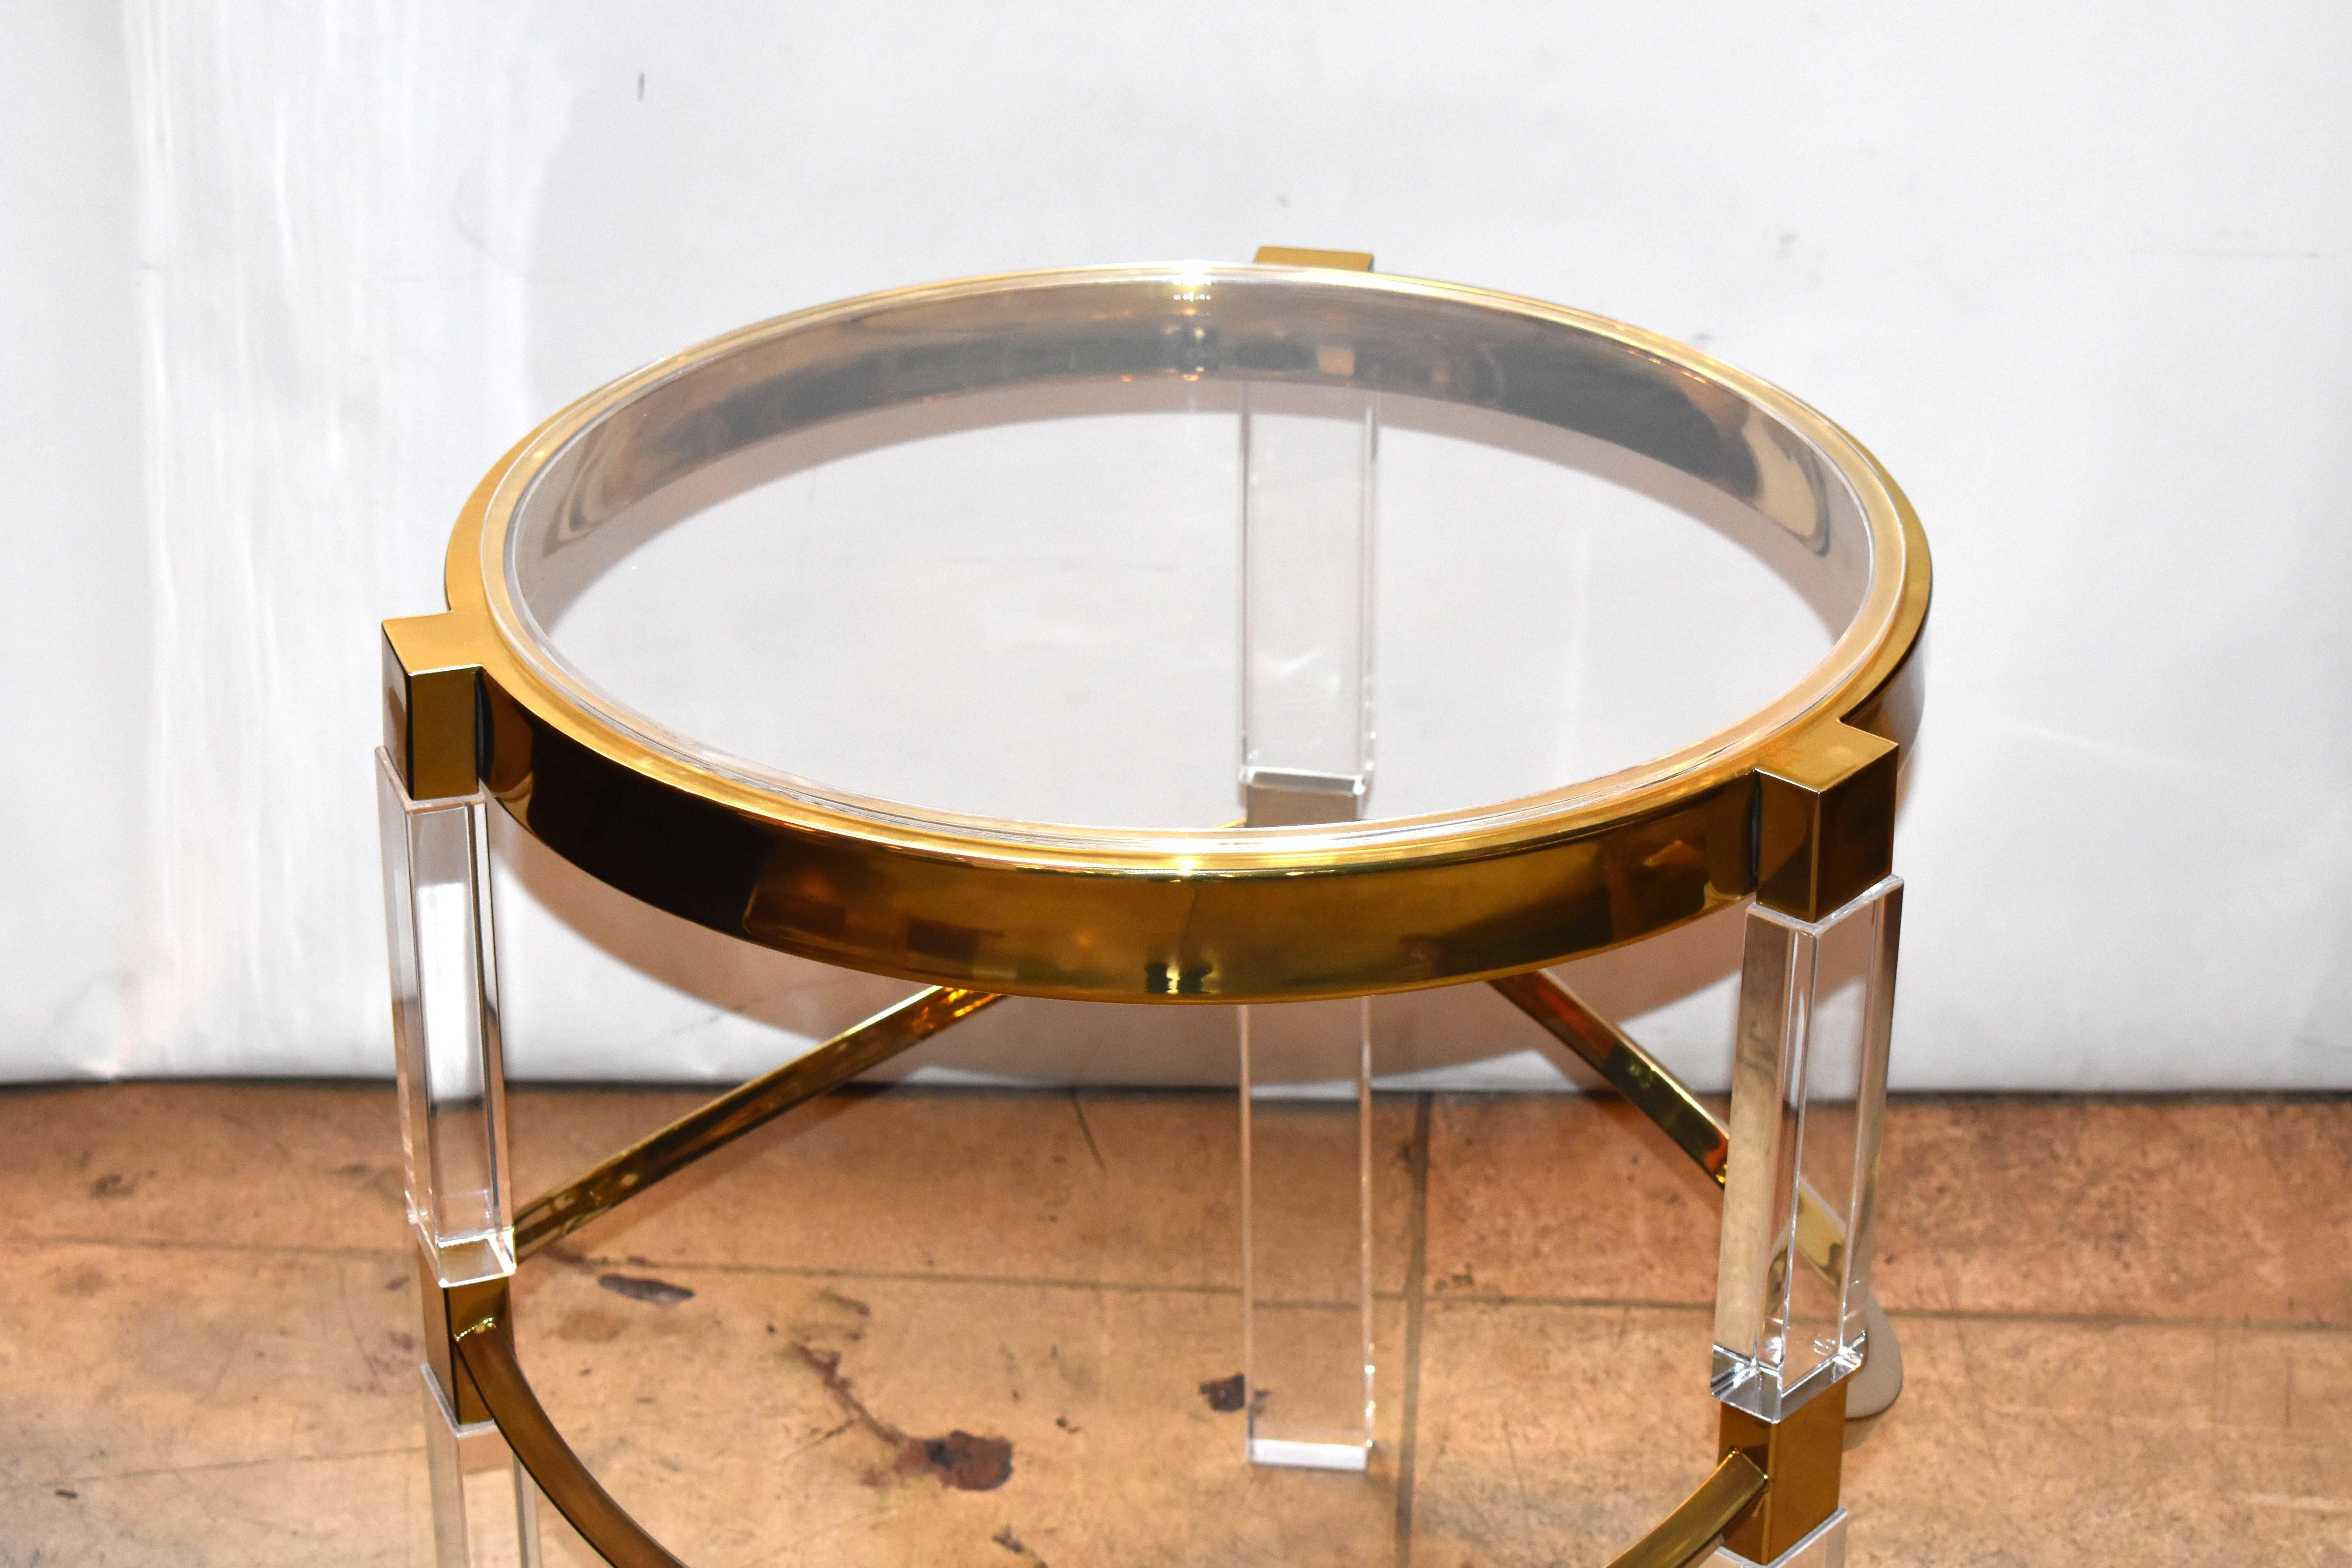 Pair of Lucite and brass side tables in the Regency style designed by Charles Hollis Jones in the 1960s.
The tables have a beautiful ornate brass base with a thick banded top, the Lucite legs are very substantial and command attention, they can be